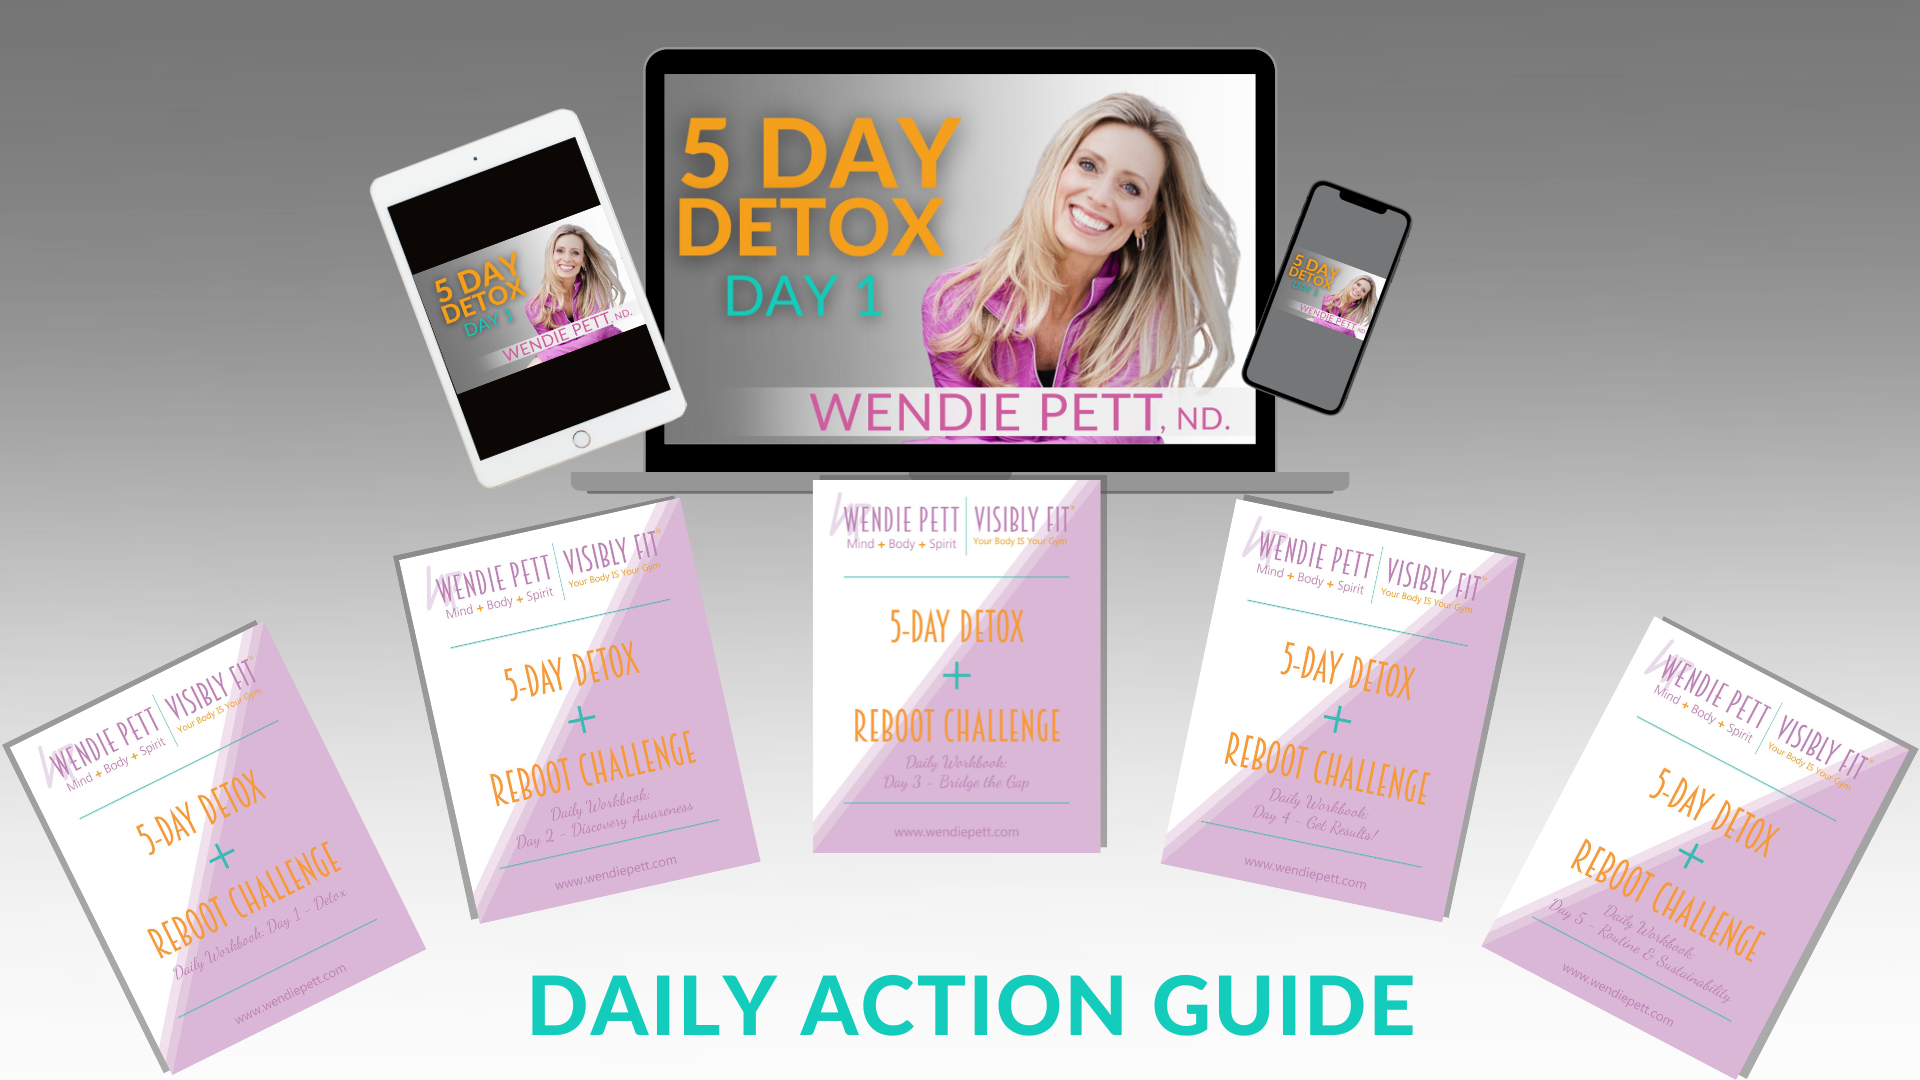 Daily Action Guide 5 Day Detox + Reboot with Wendie Pett